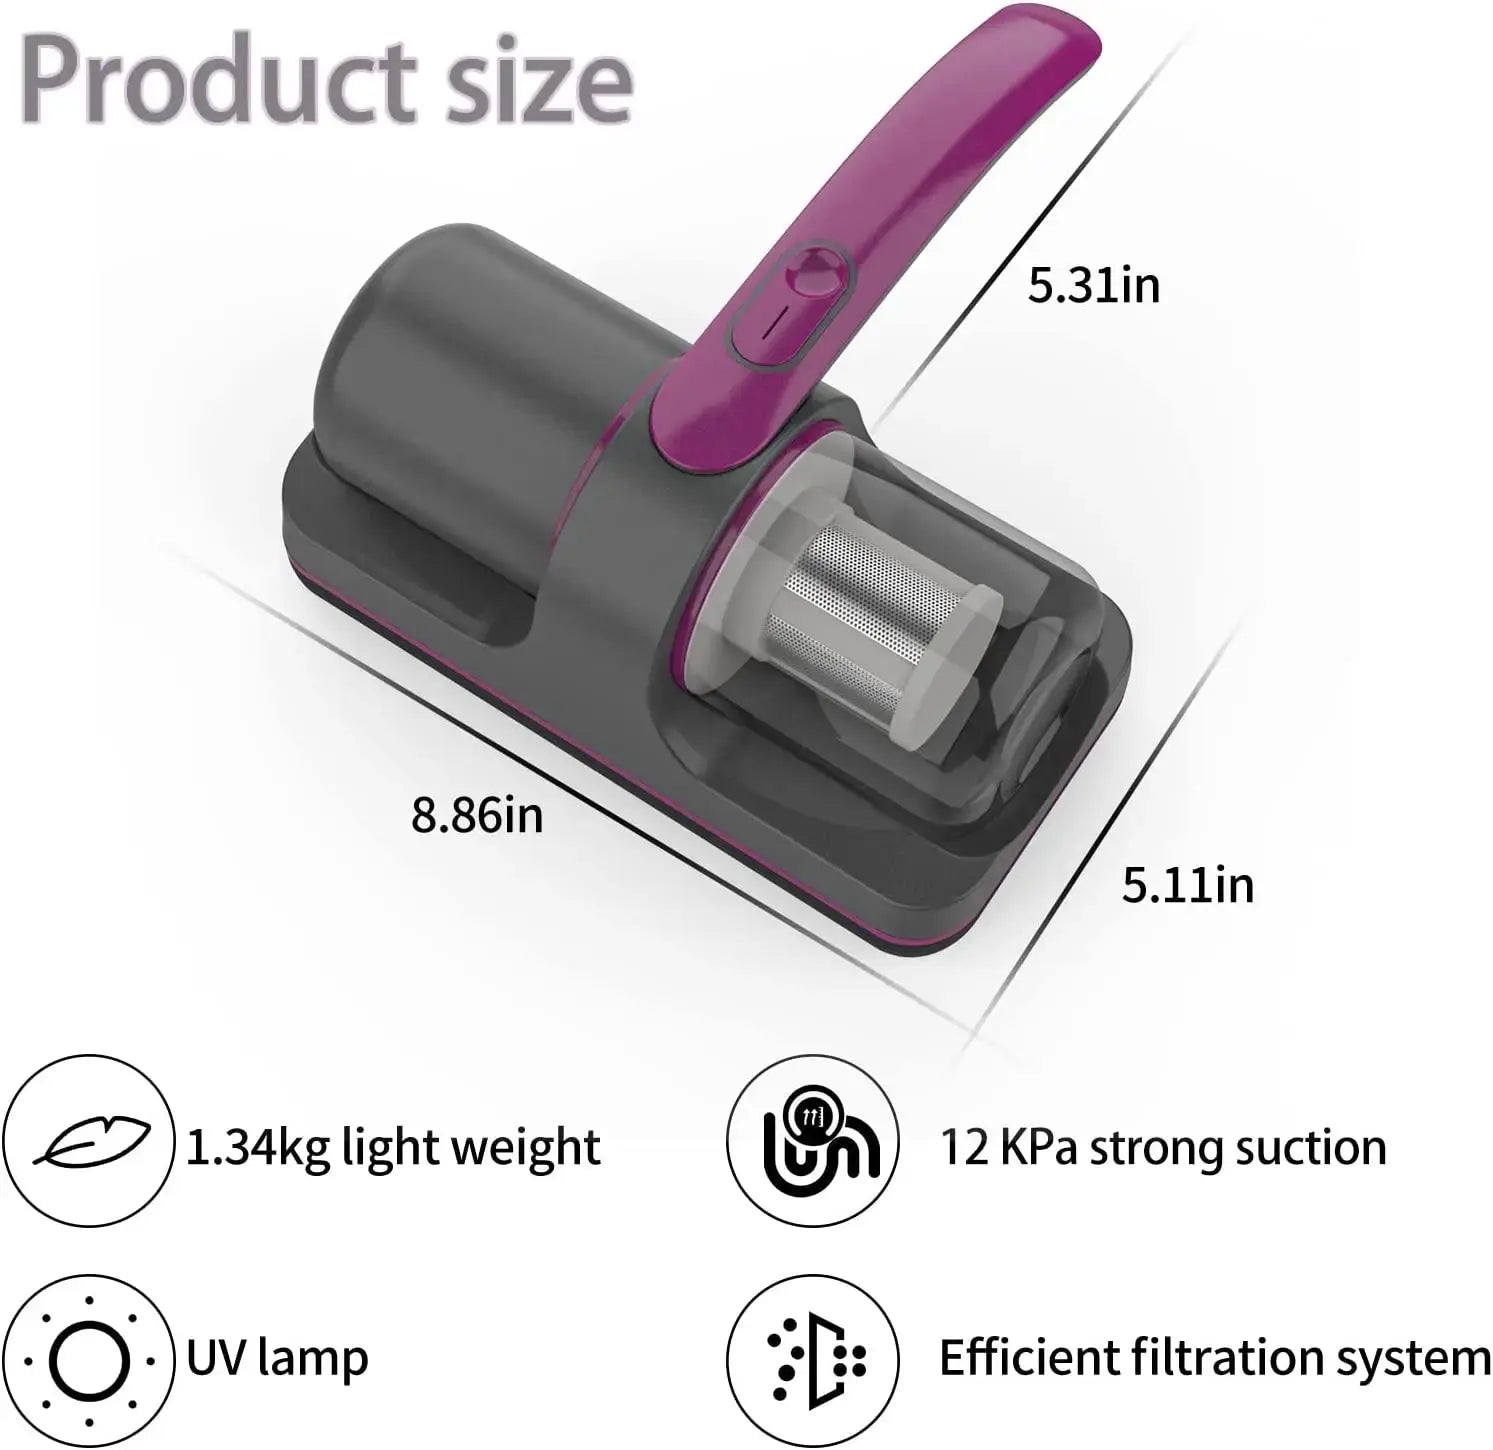 An illustration of the Soulful Trading 10000Pa High Frequency Vacuum Cleaner with a UV lamp, highlighting its dimensions, lightweight design, and strong suction feature.